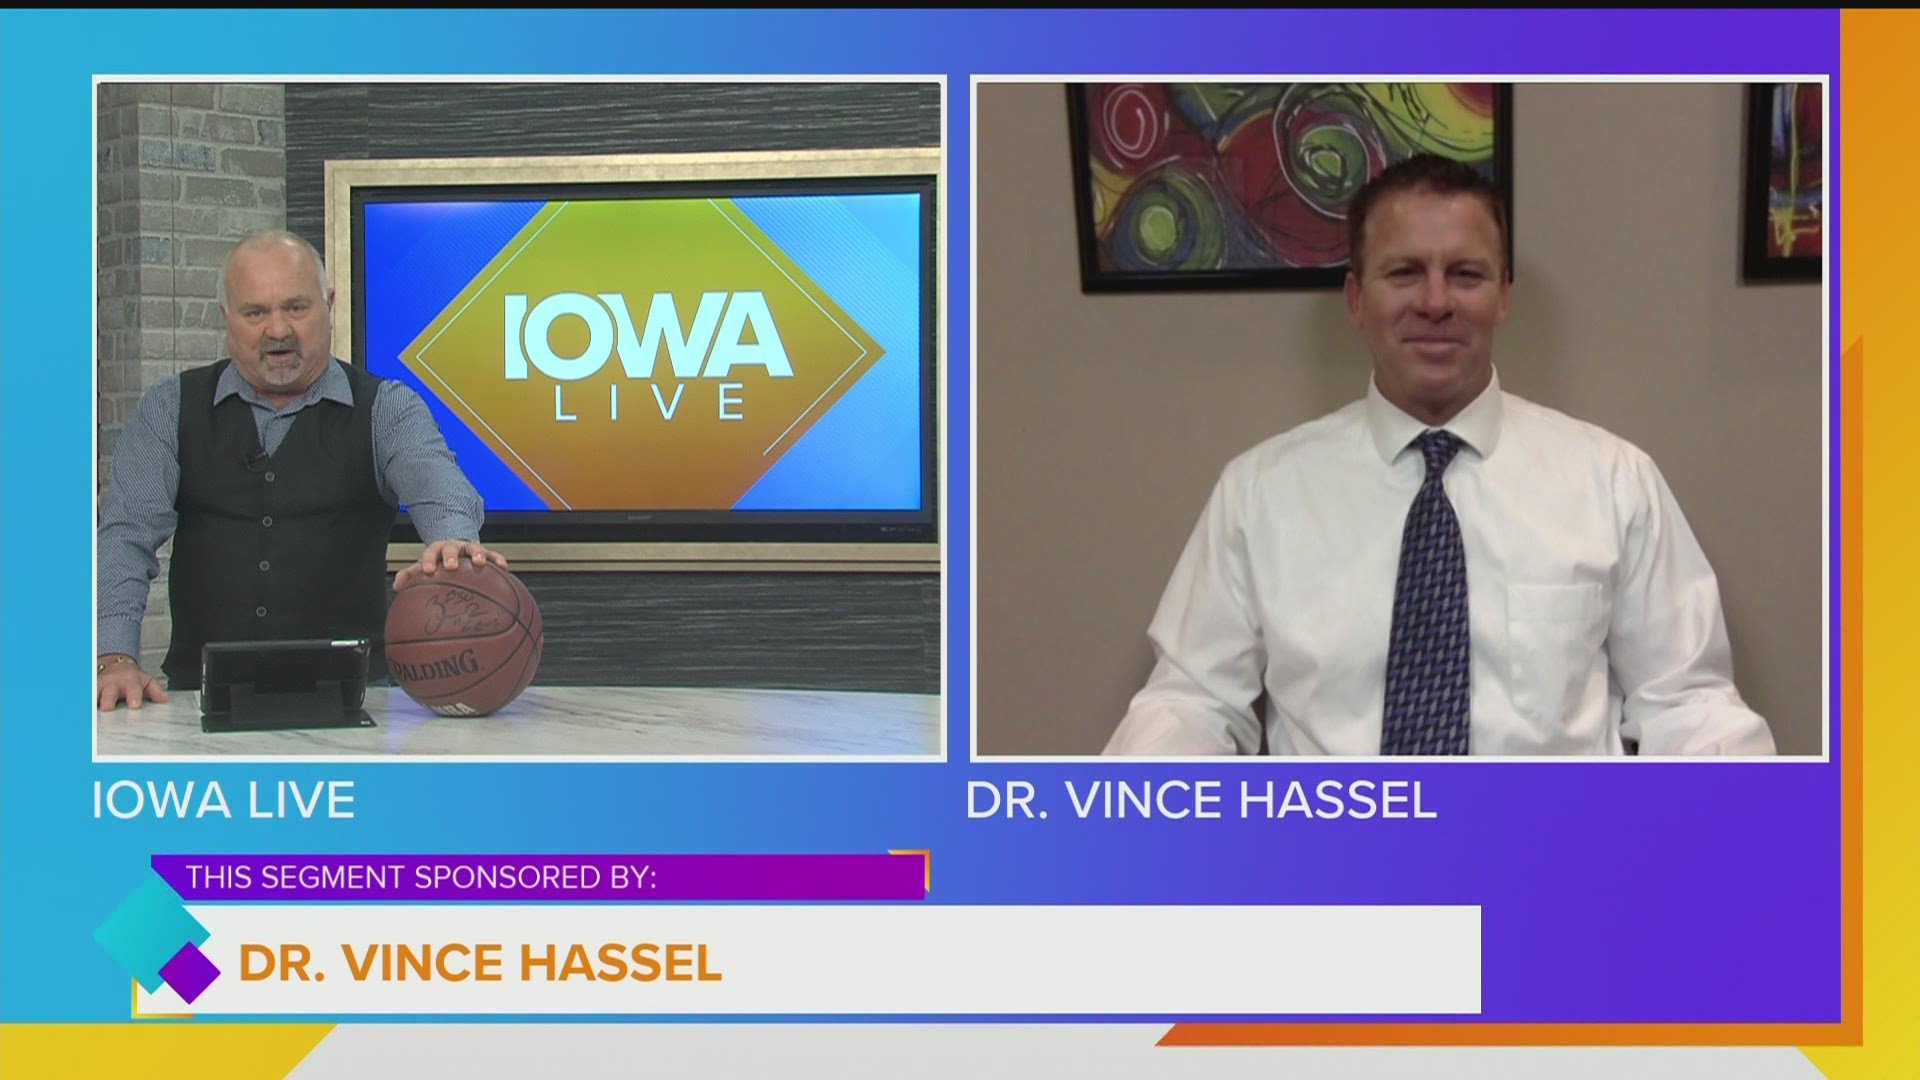 Lou chats with Dr. Vince Hassel about his weight loss program | PAID CONTENT